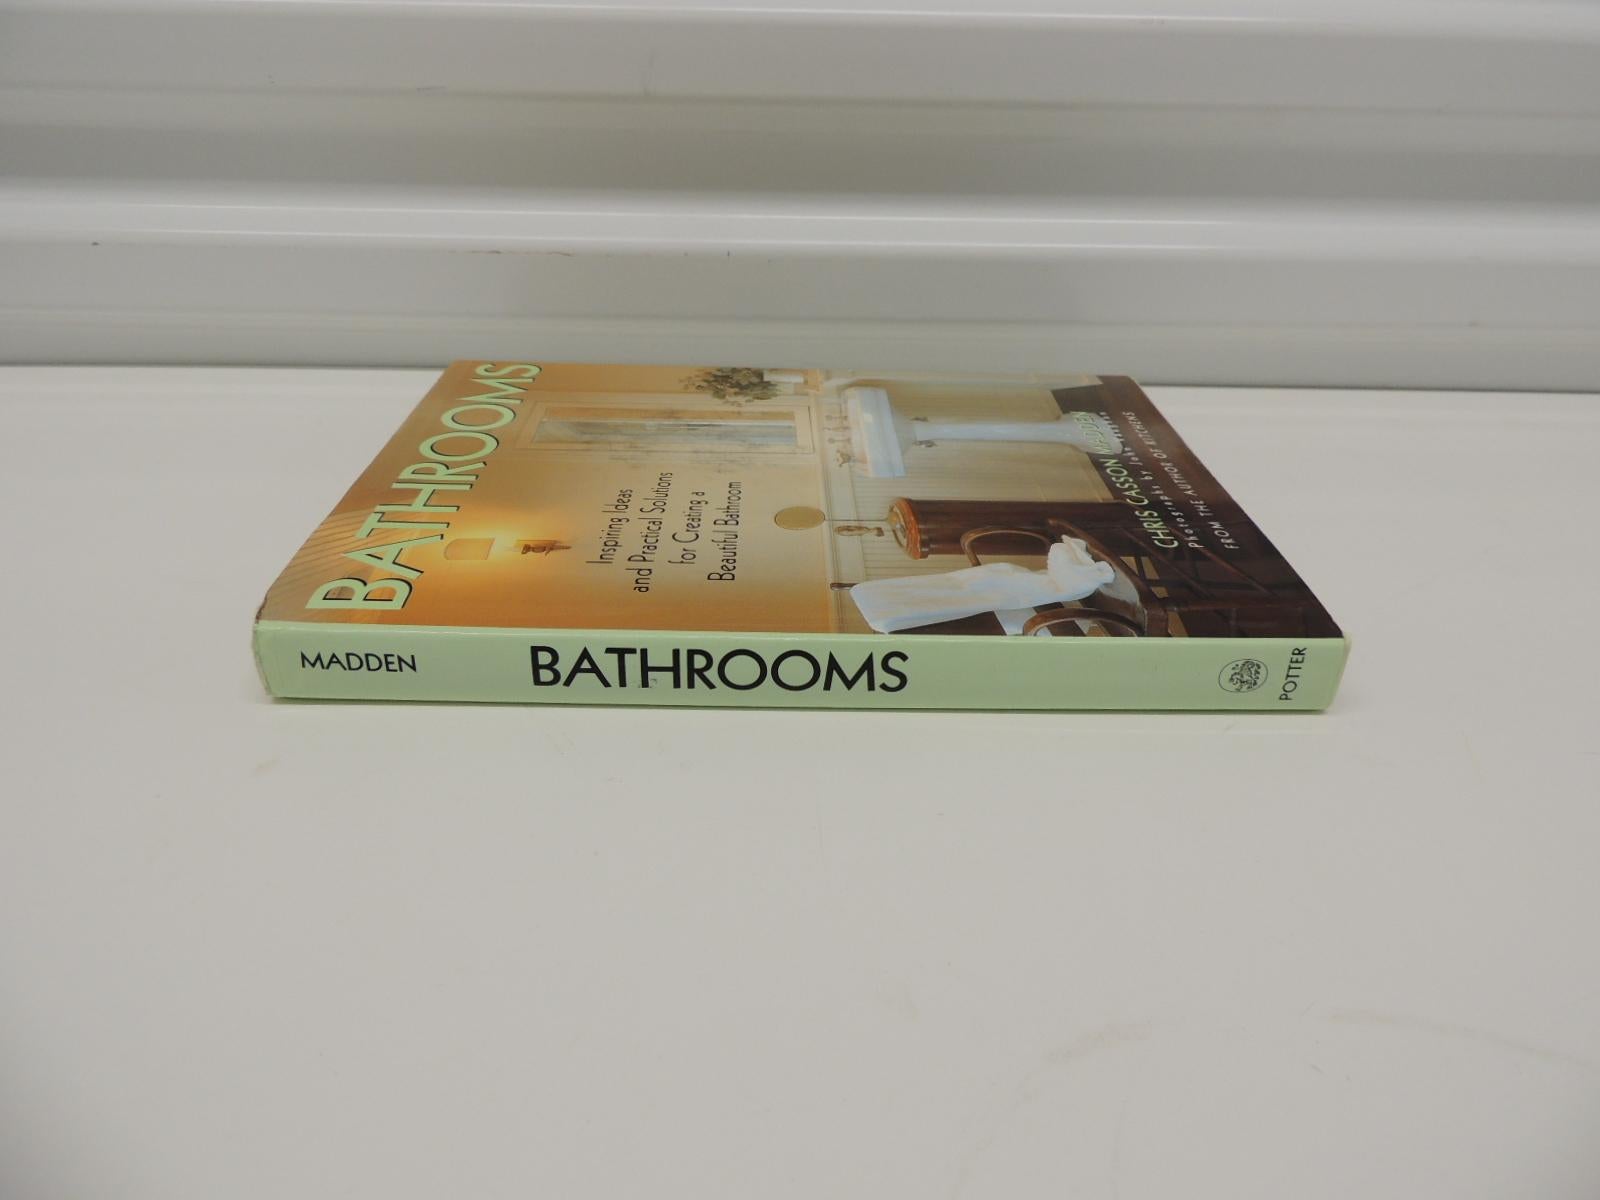 Late 20th Century Bathrooms: Inspiring Ideas and Practical Solutions Hardcover Book